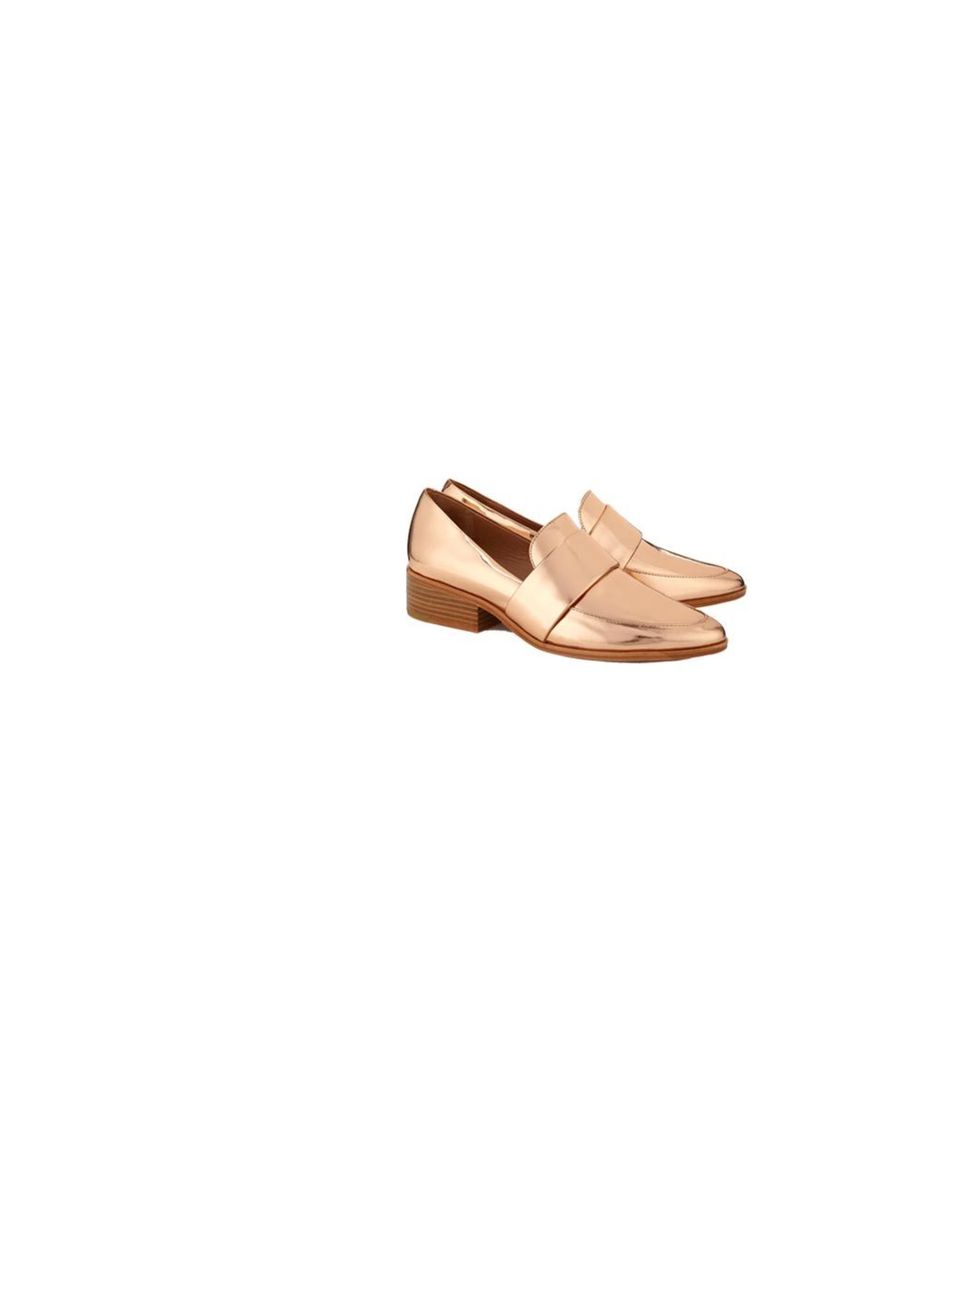 <p>3.1 Phillip Lim loafers, £380, at <a href="http://www.avenue32.com/designers/phillip-lim/40mm-rose-gold-quinn-loafers-33701.html">Avenue32.com</a></p>